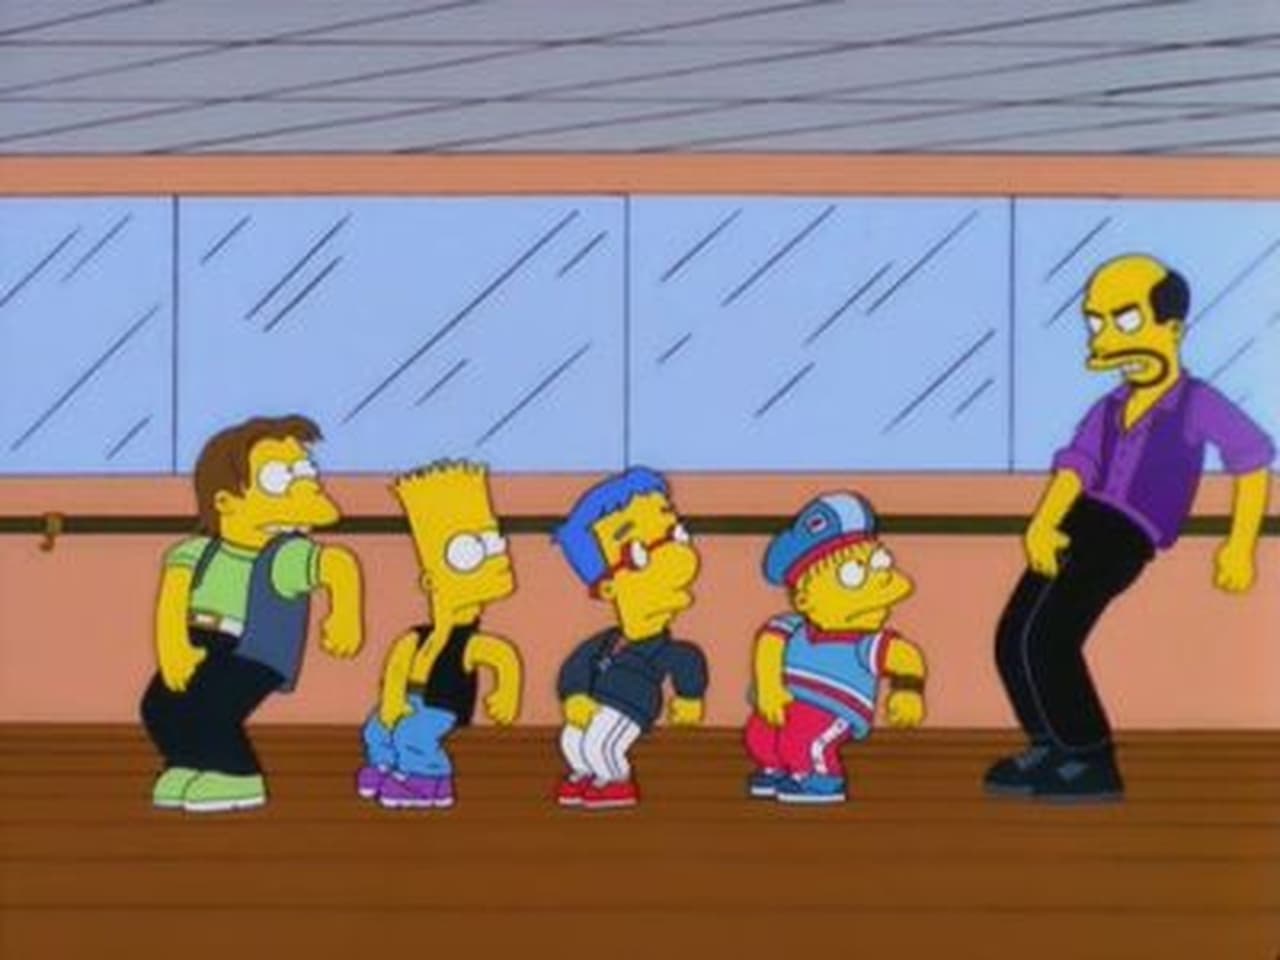 The Simpsons - Season 12 Episode 14 : New Kids on the Blecch